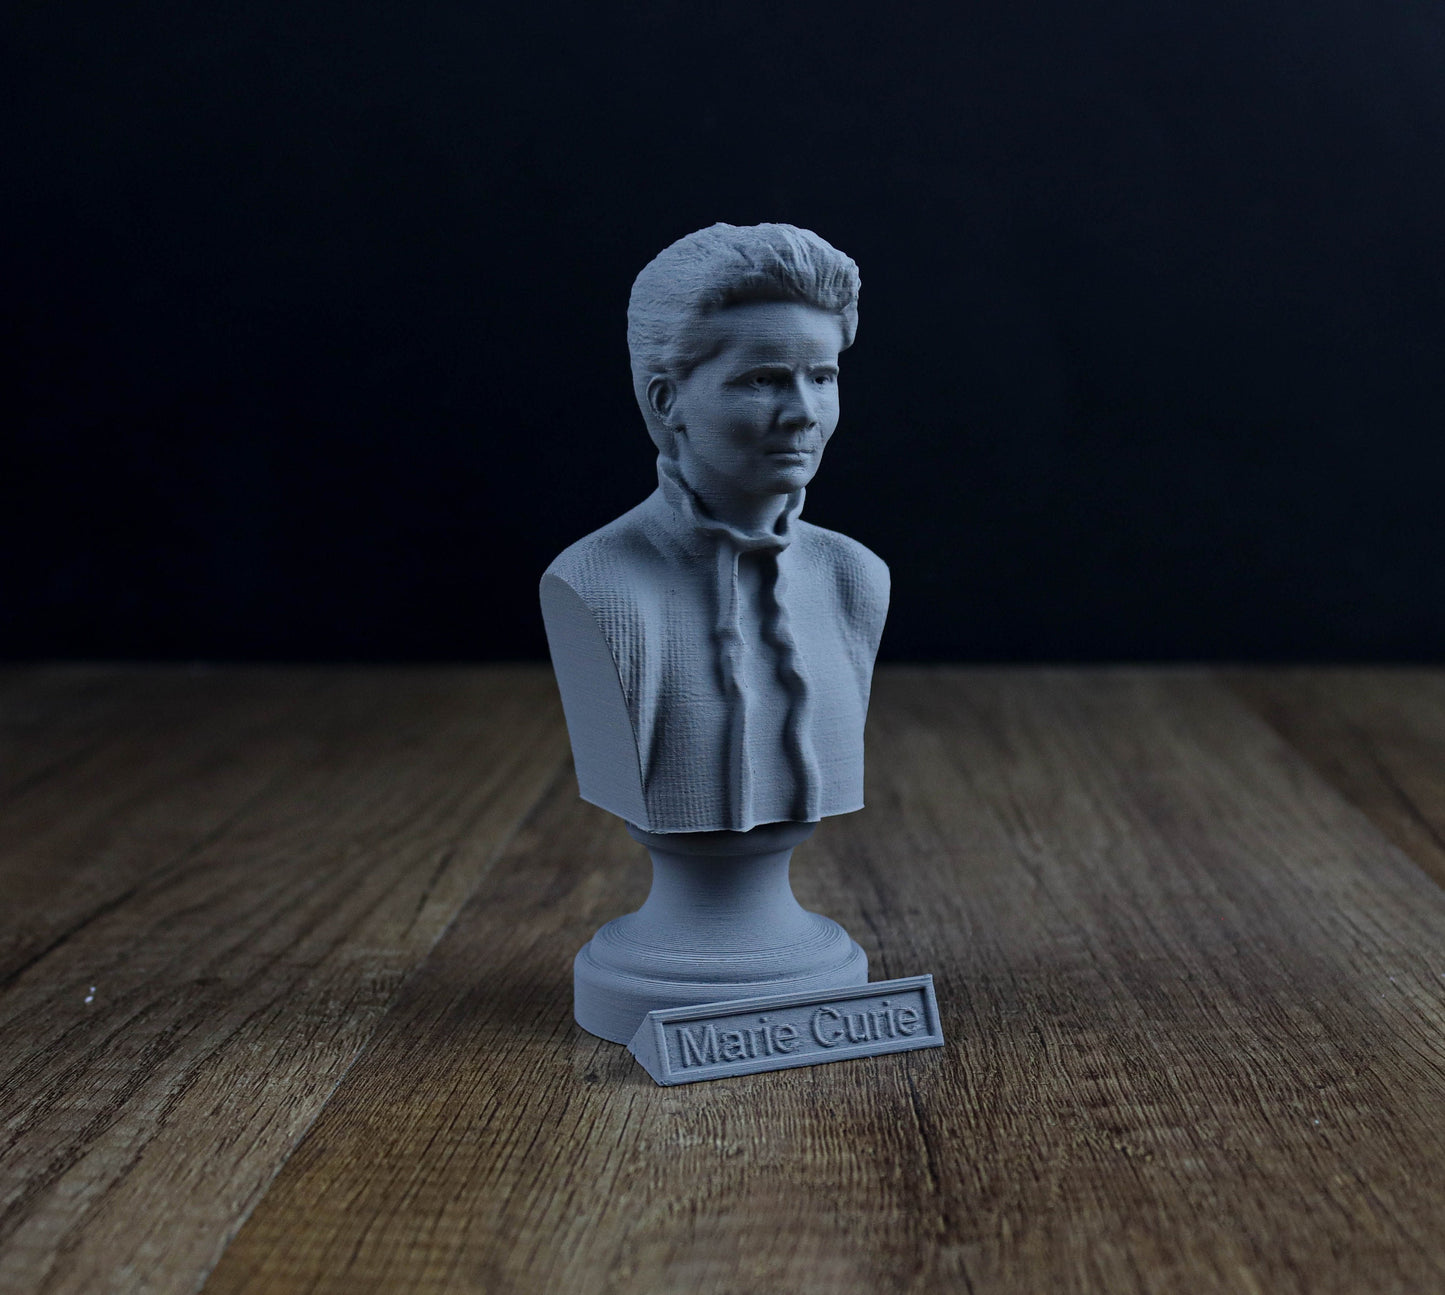 Marie Curie Bust, Physicist and Chemist Pioneer, Sculpture Decor